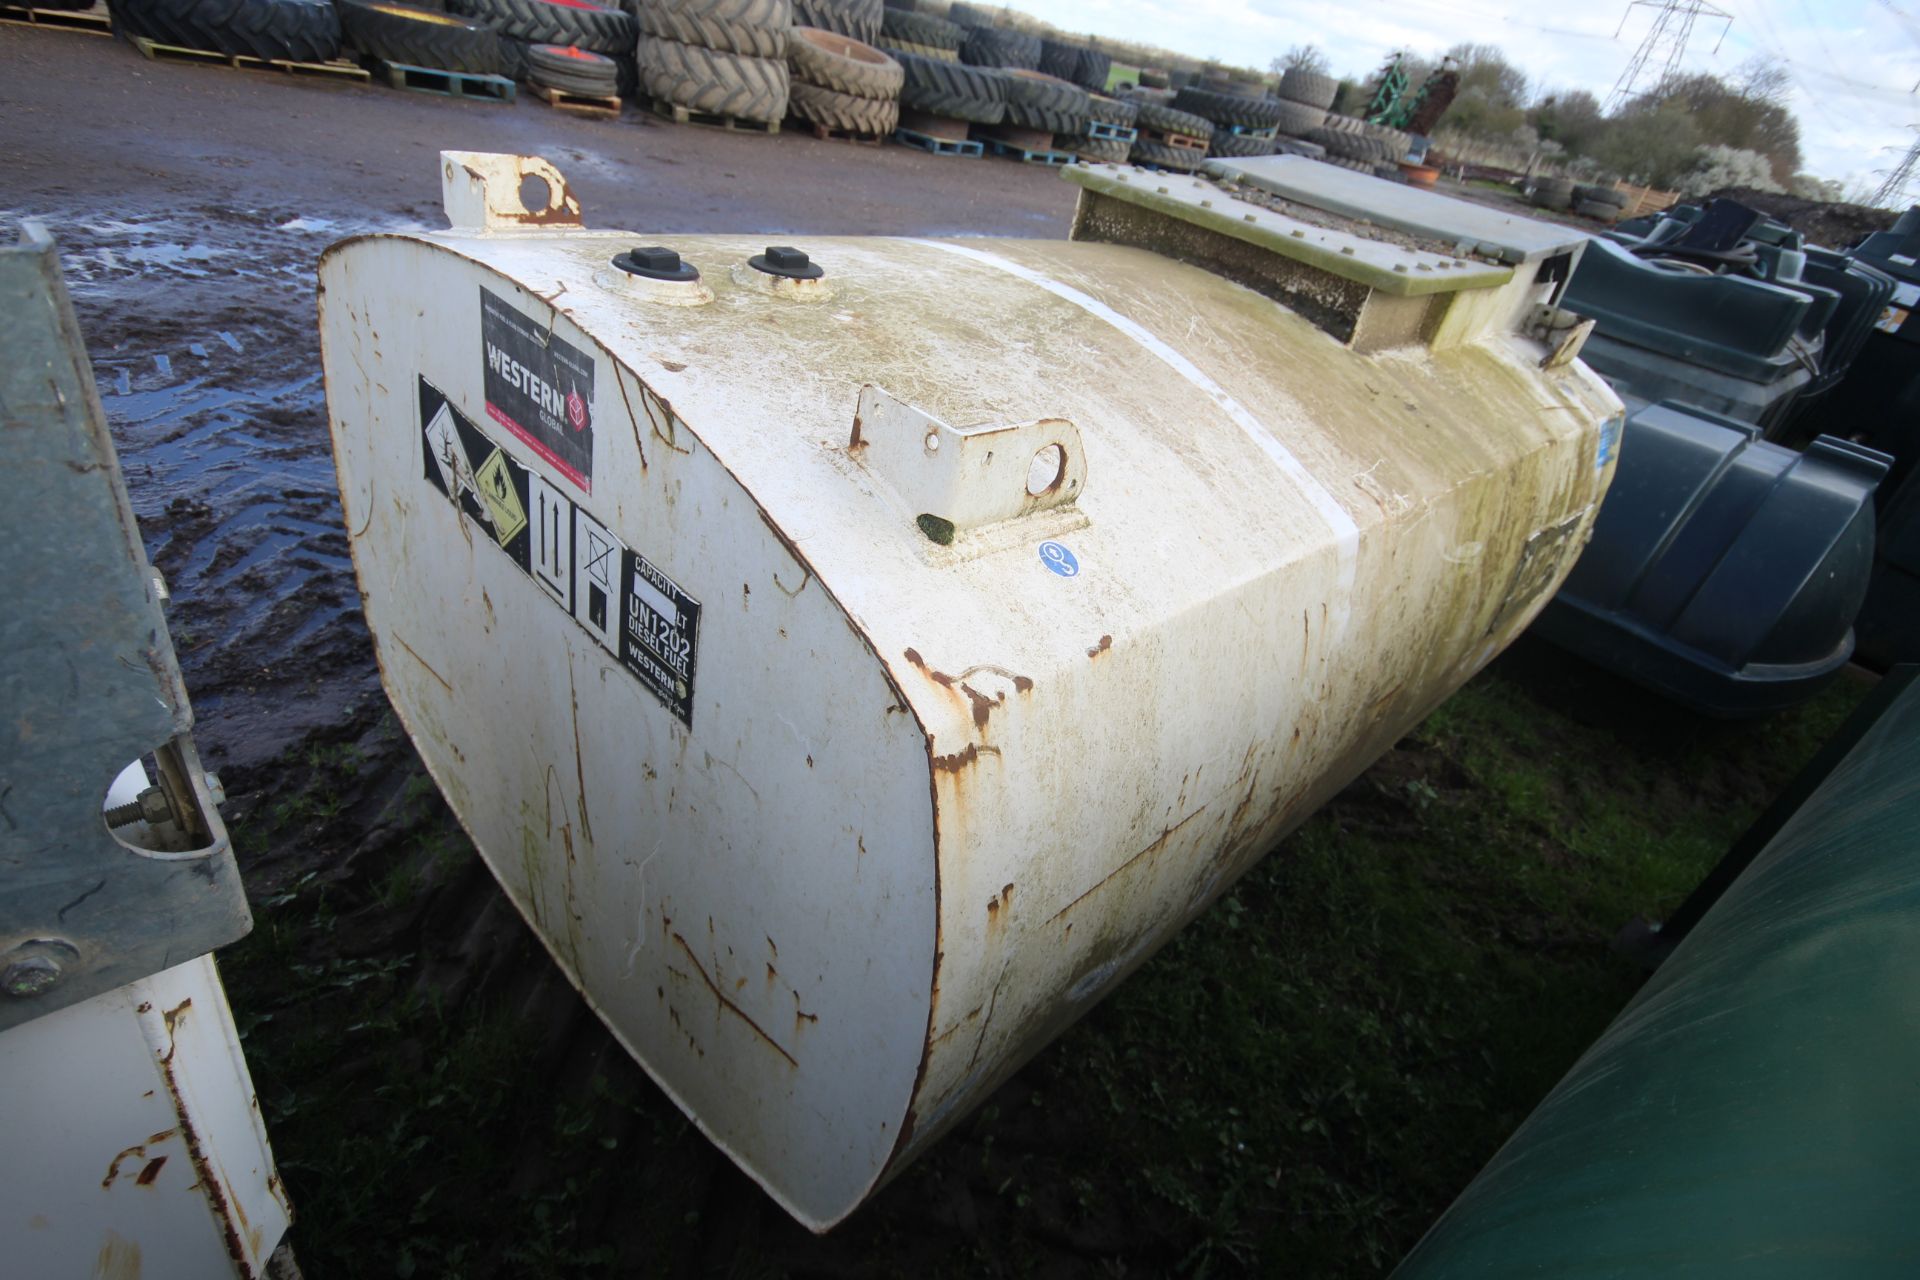 Western Abbi 1,940L bunded steel site fuel tank. With manual pump. For sale on behalf of the - Bild 3 aus 8